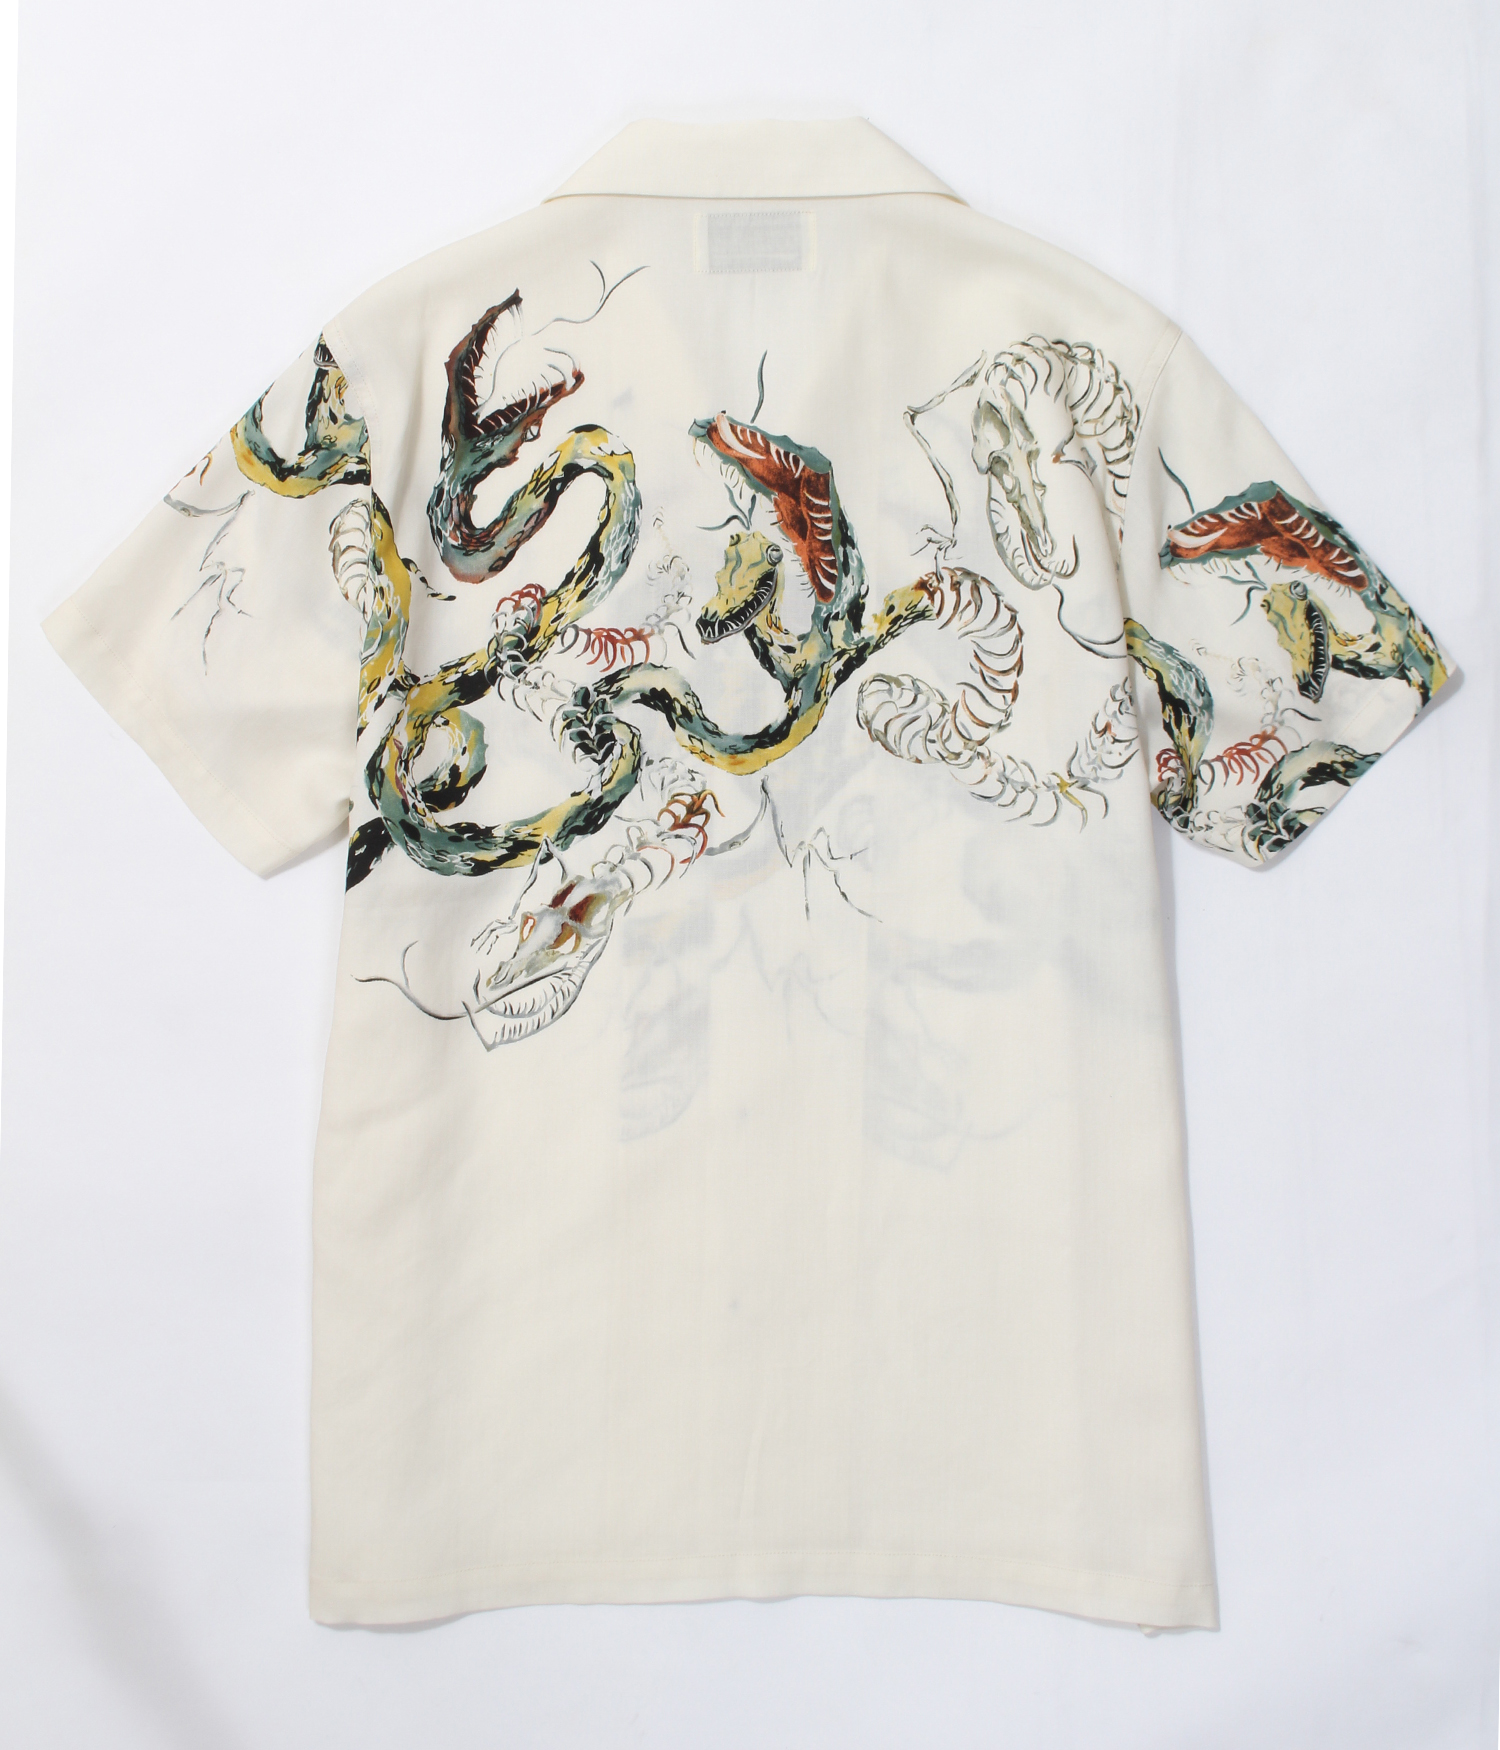 RELAX – (R)evolution » Blog Archive » 5/27 WACKO MARIA / NEW ARRIVAL